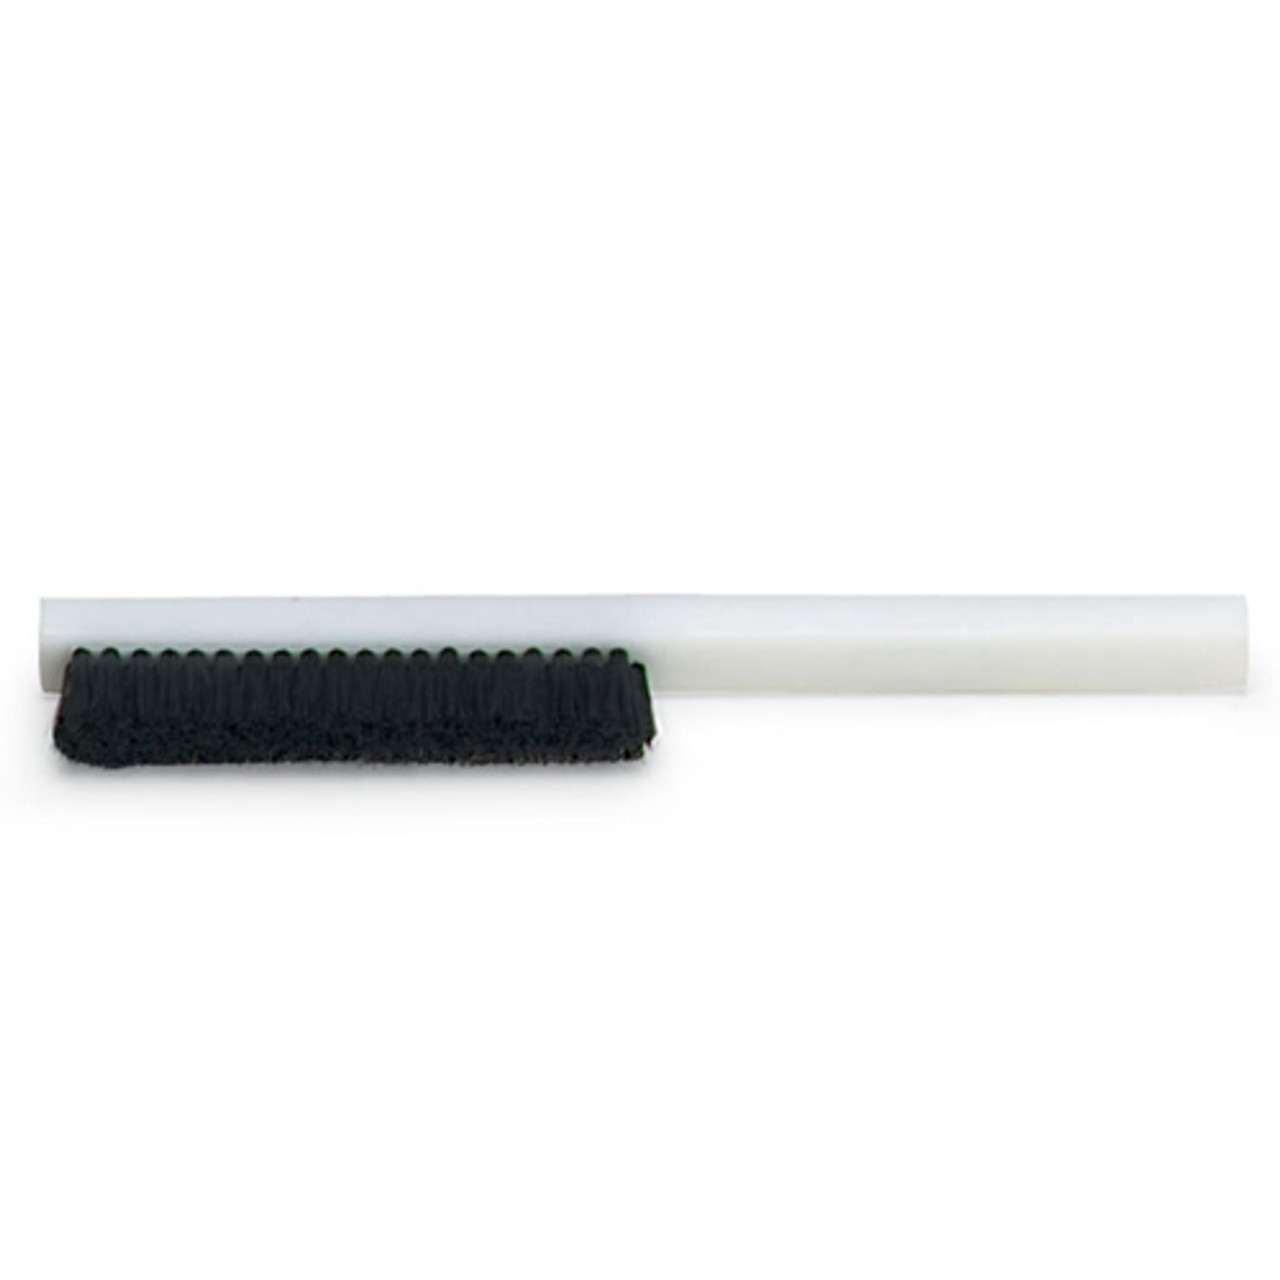 Washout Brushes with Plastic Handle - 4-Row Lucite